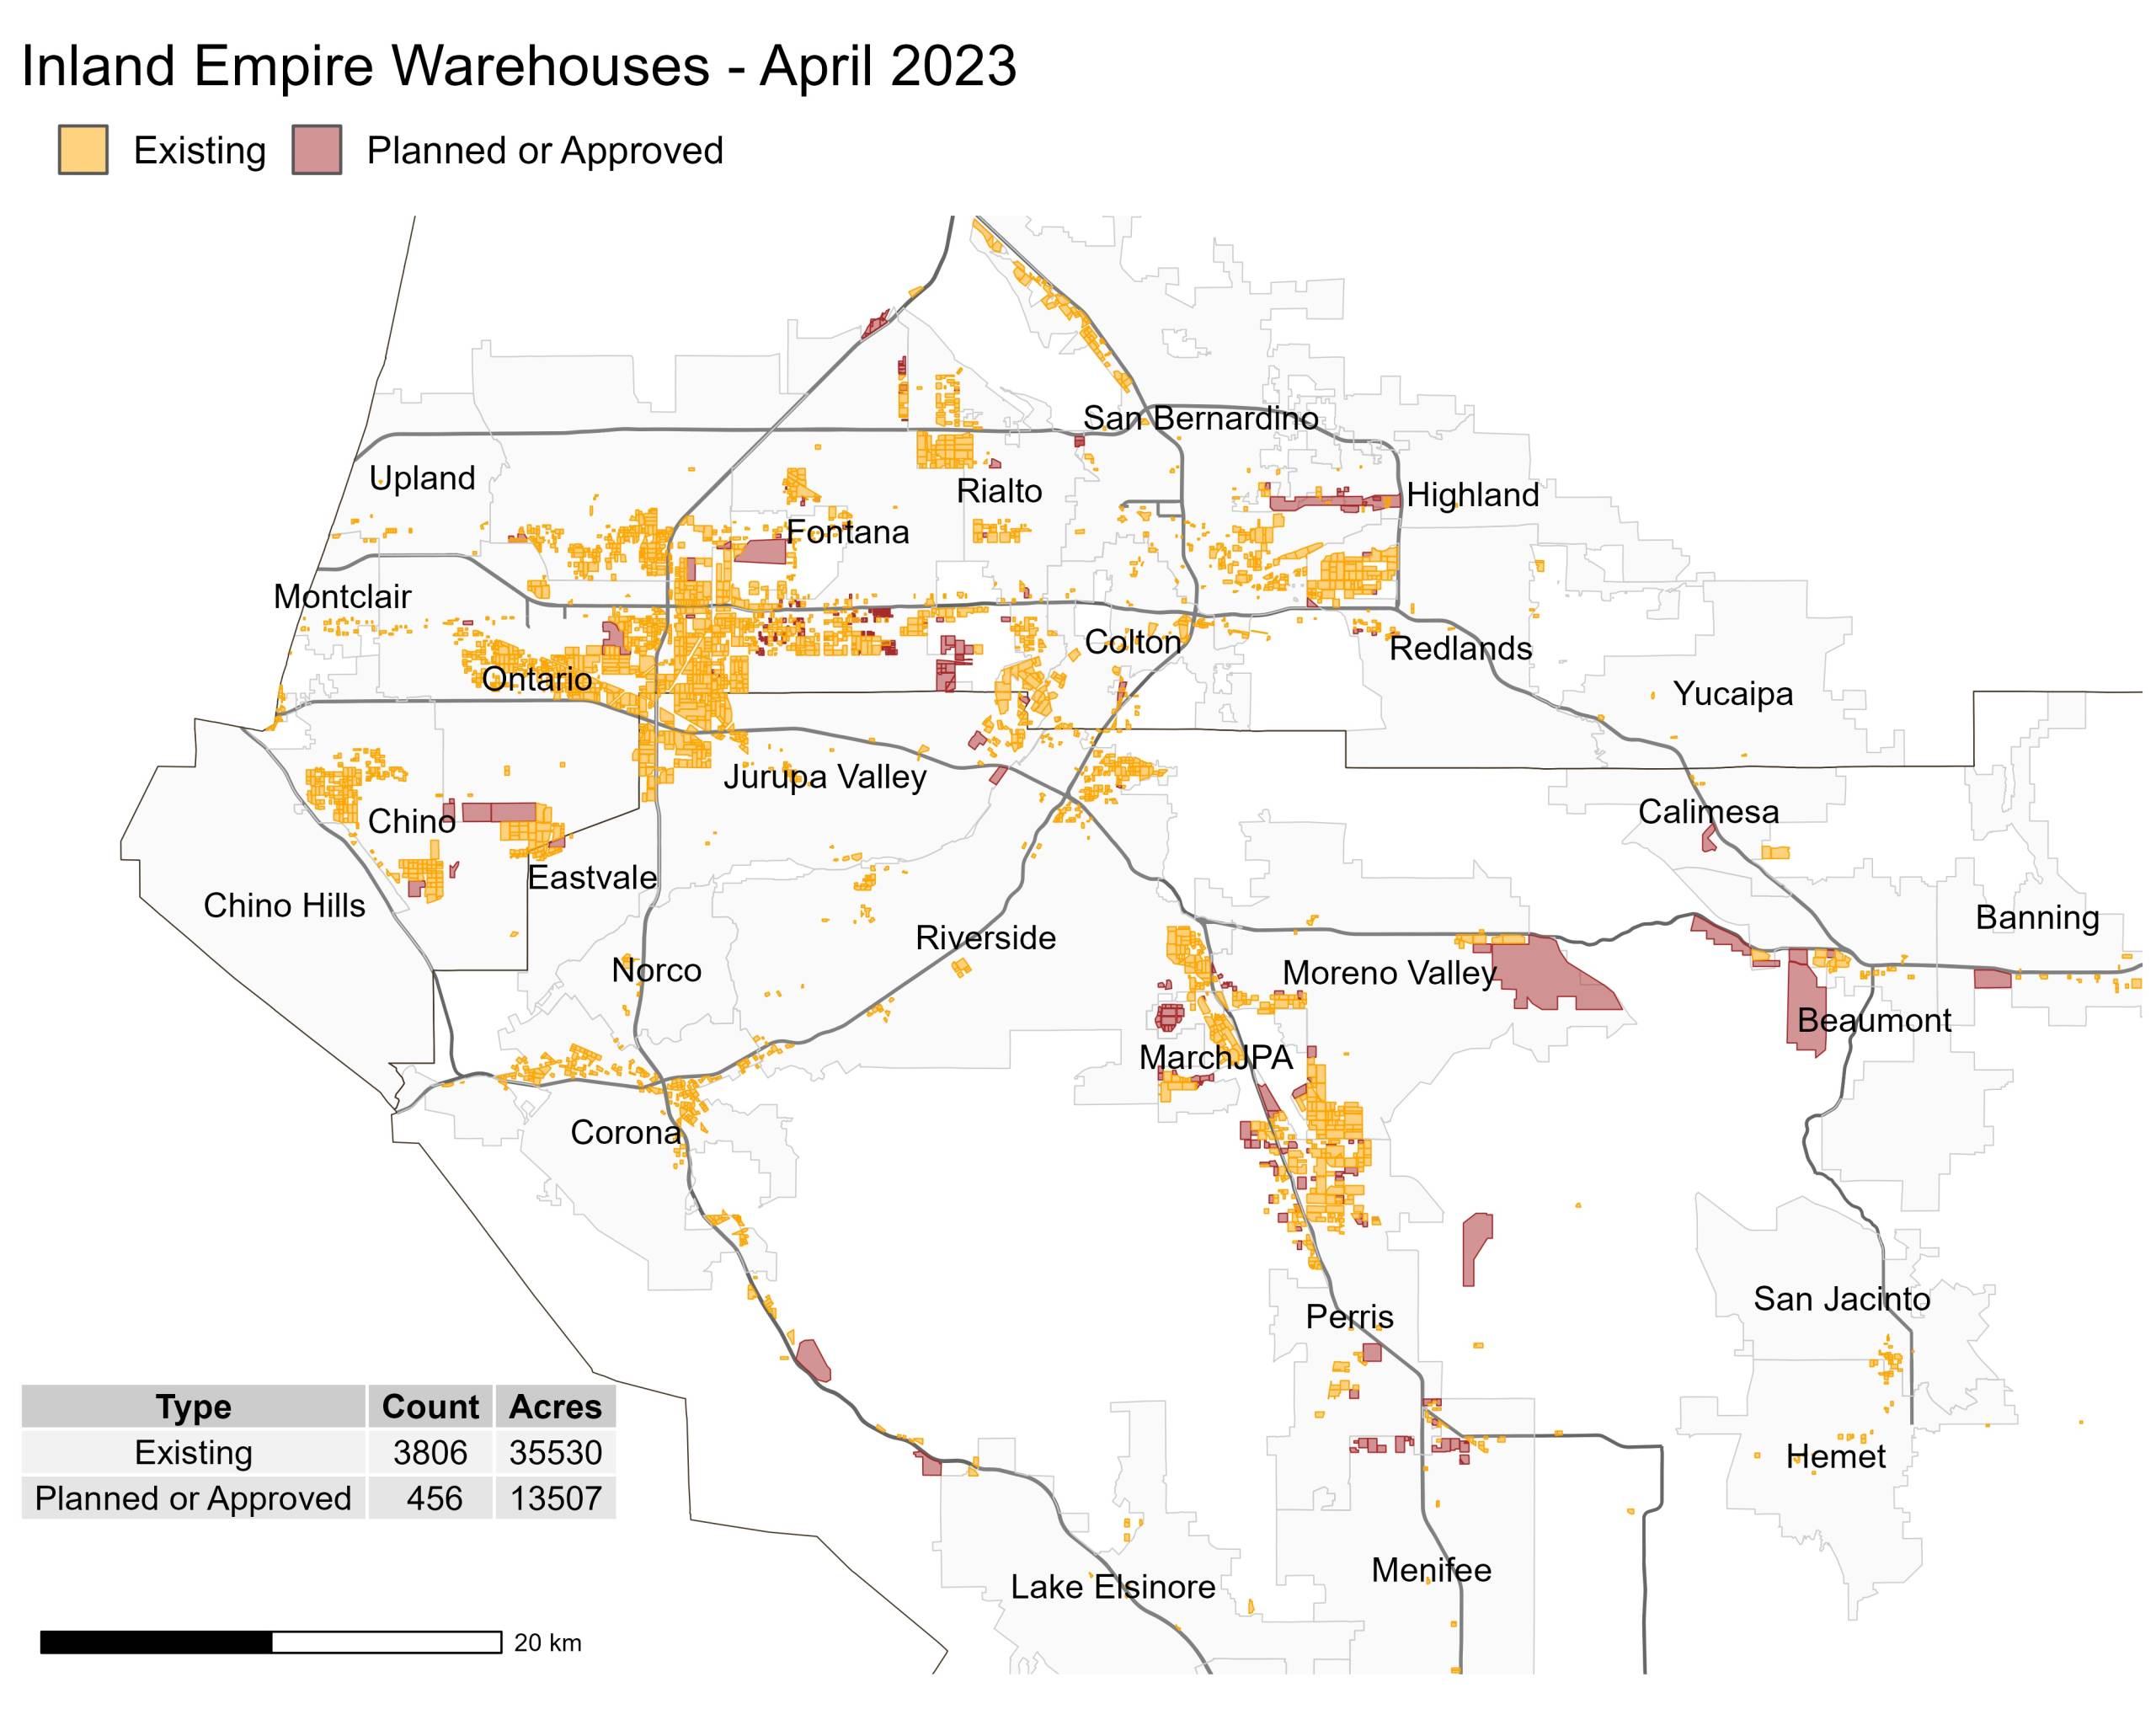 A map showing the many warehouses scattered across the Inland Empire region.